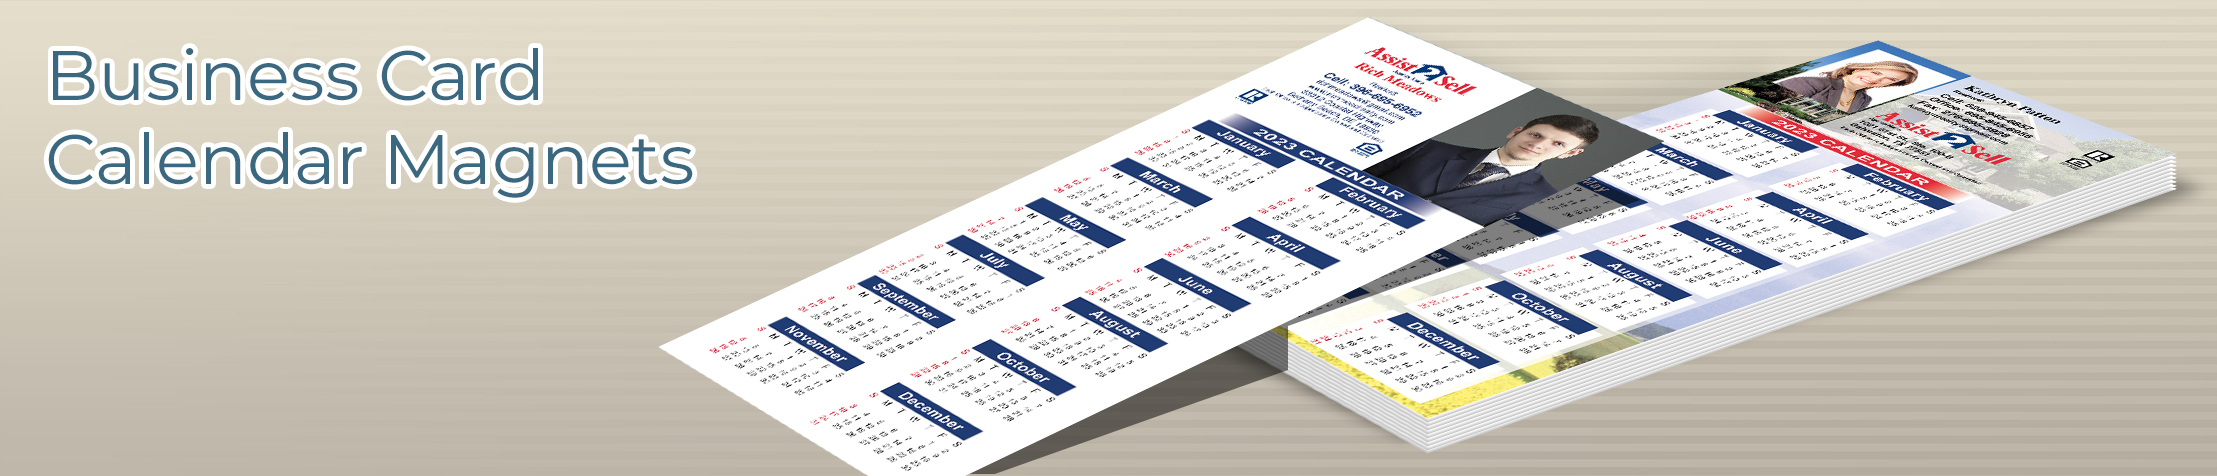 Assist2Sell Real Estate Business Card Calendar Magnets - Assist2Sell Real Estate  2019 calendars with photo and contact info | BestPrintBuy.com